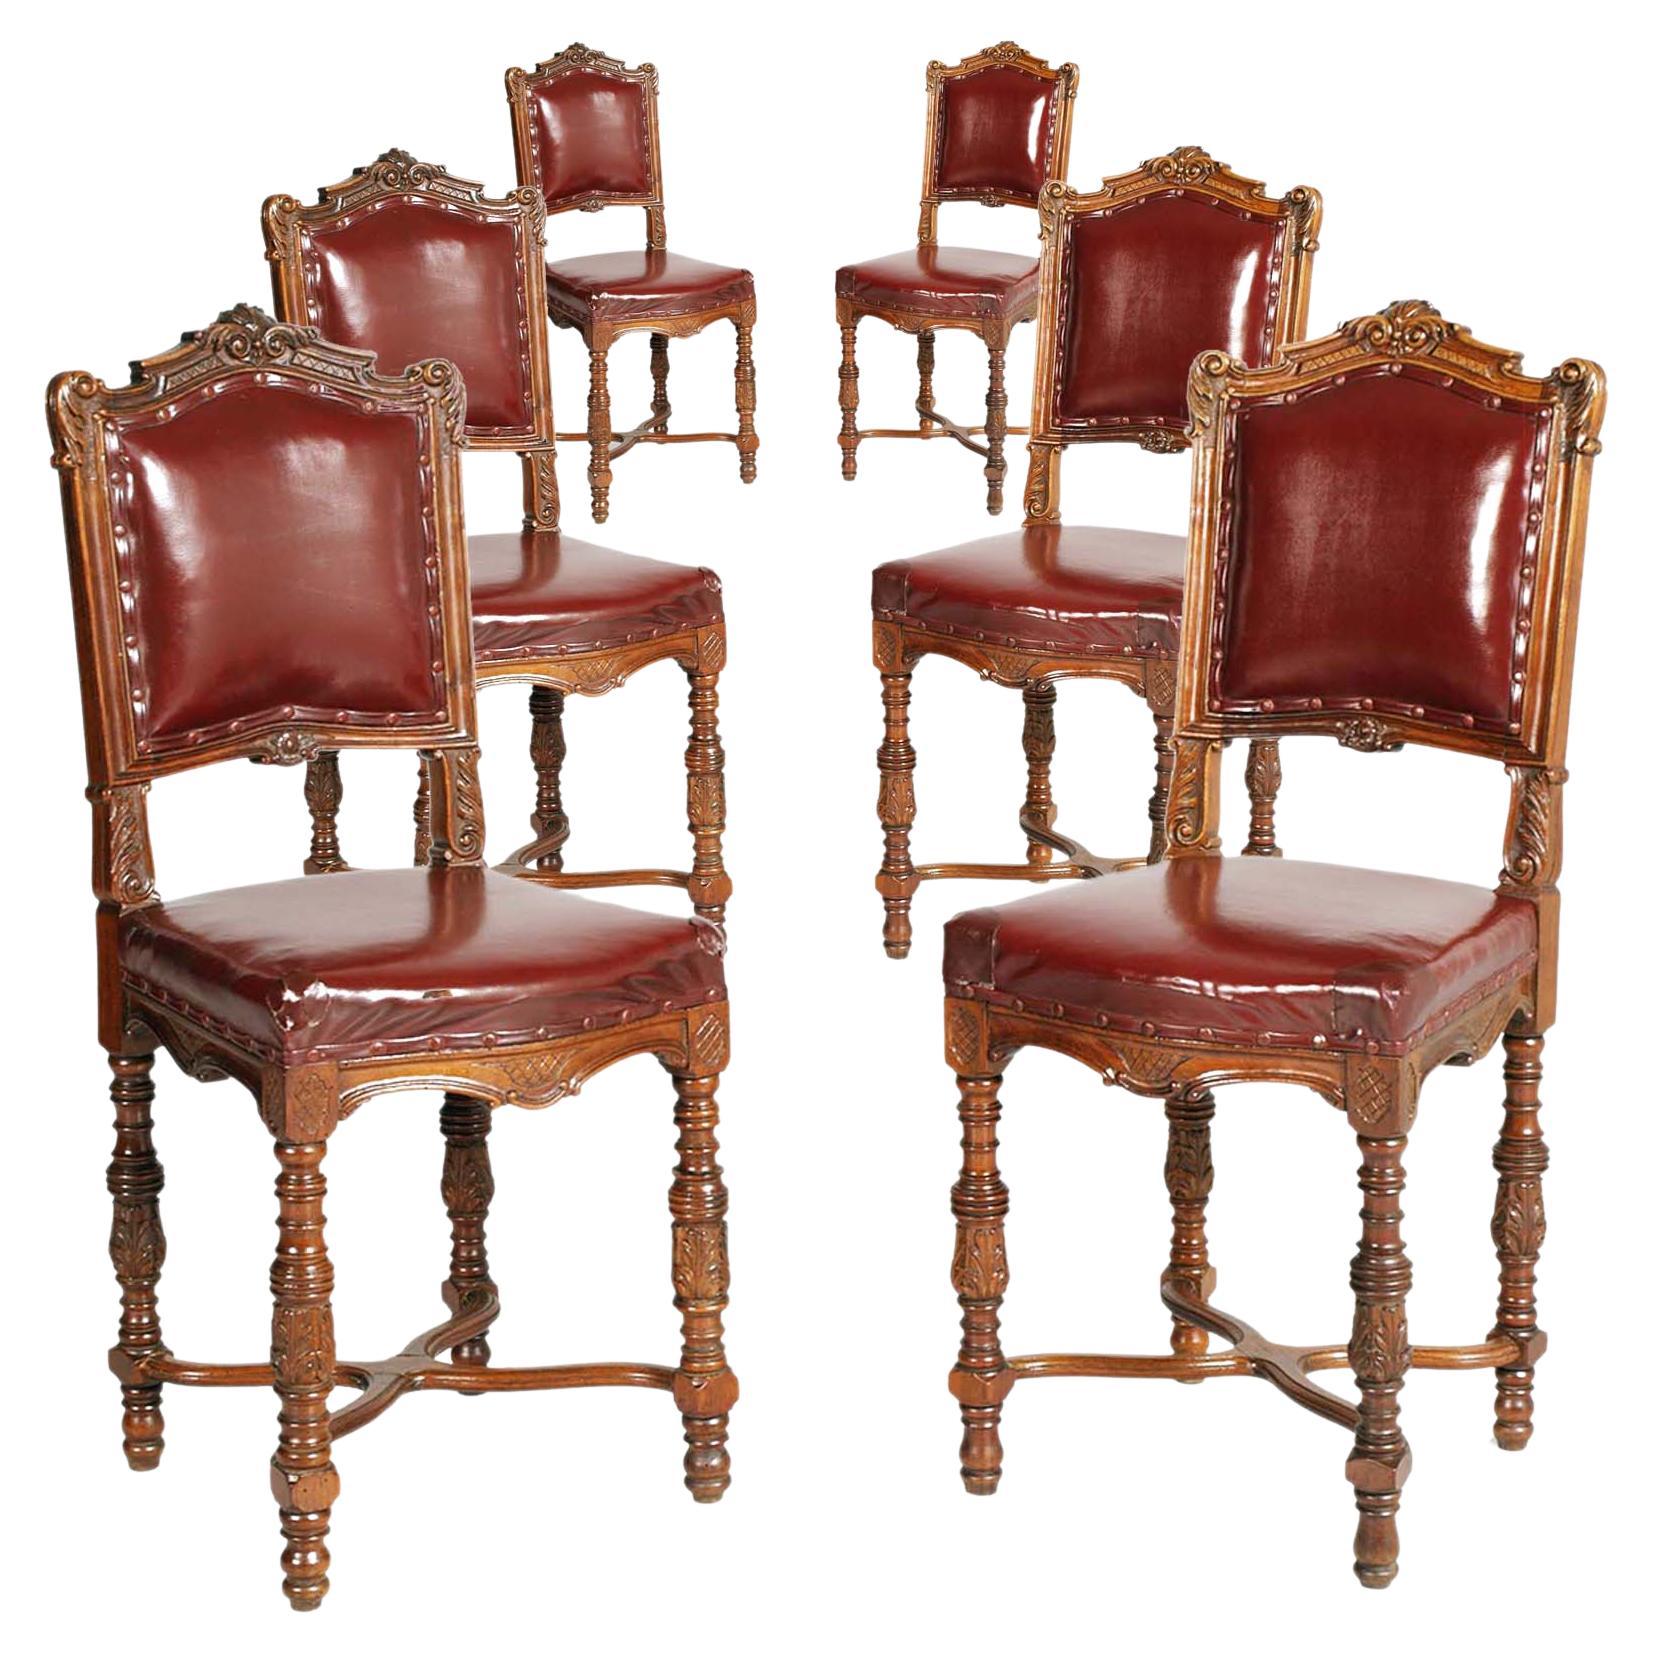 1880s Italian Chairs Neoclassic Eclectic Hand Carved Walnut Leather Upholstered For Sale